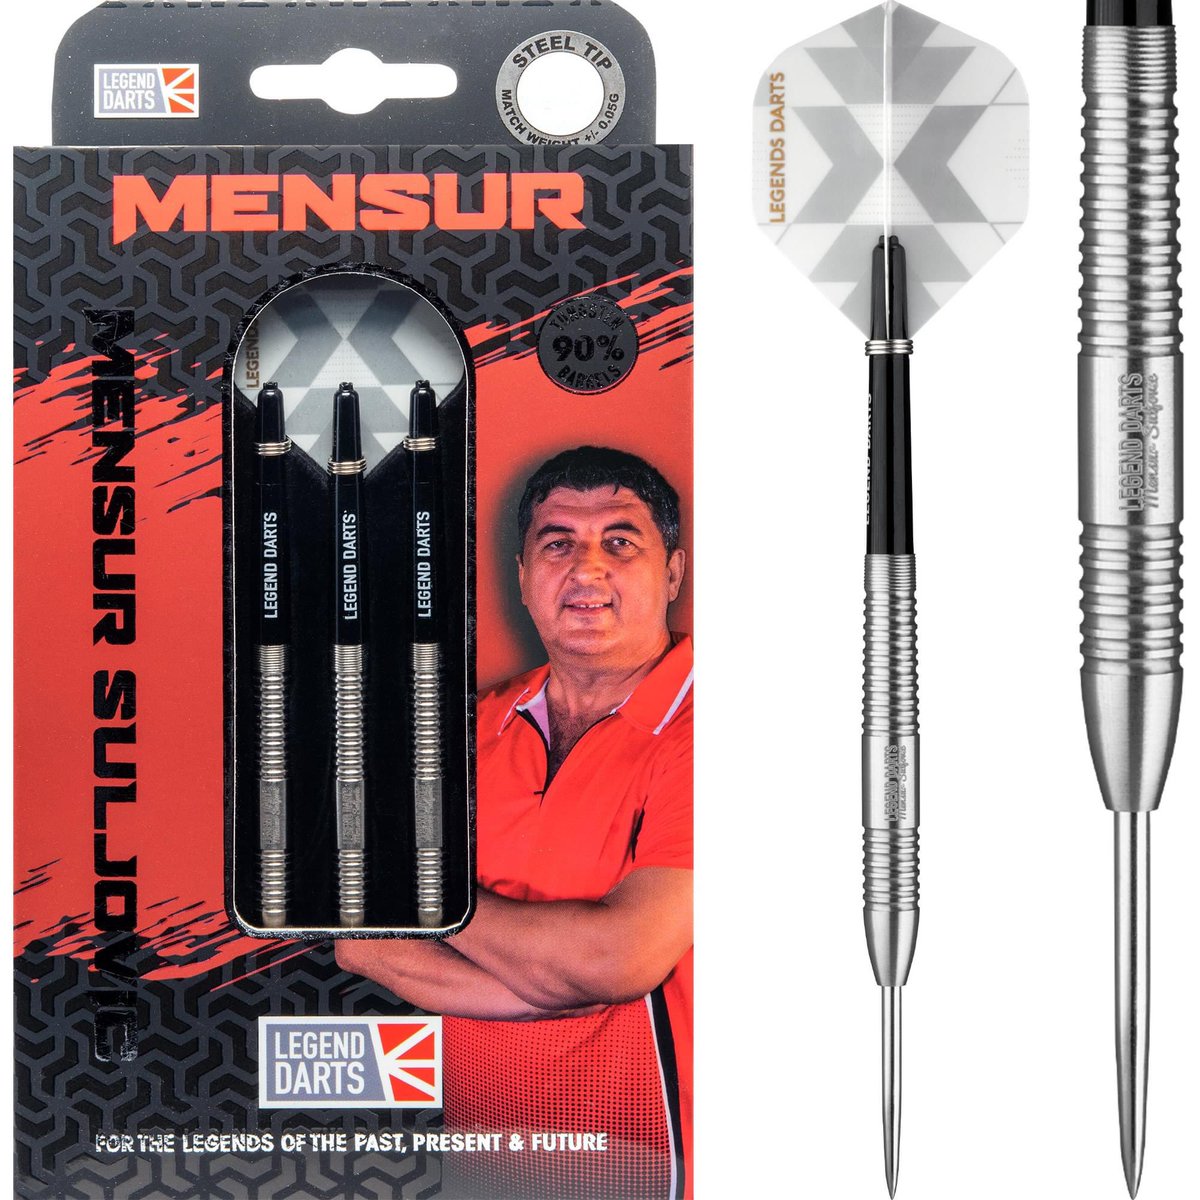 CHECK OUT THE MENSUR RANGE 🎯 Available now in all colours & weights ‼️ ⬇️⬇️⬇️ bit.ly/MensurDarts All Legend Darts products are available at legenddarts.com